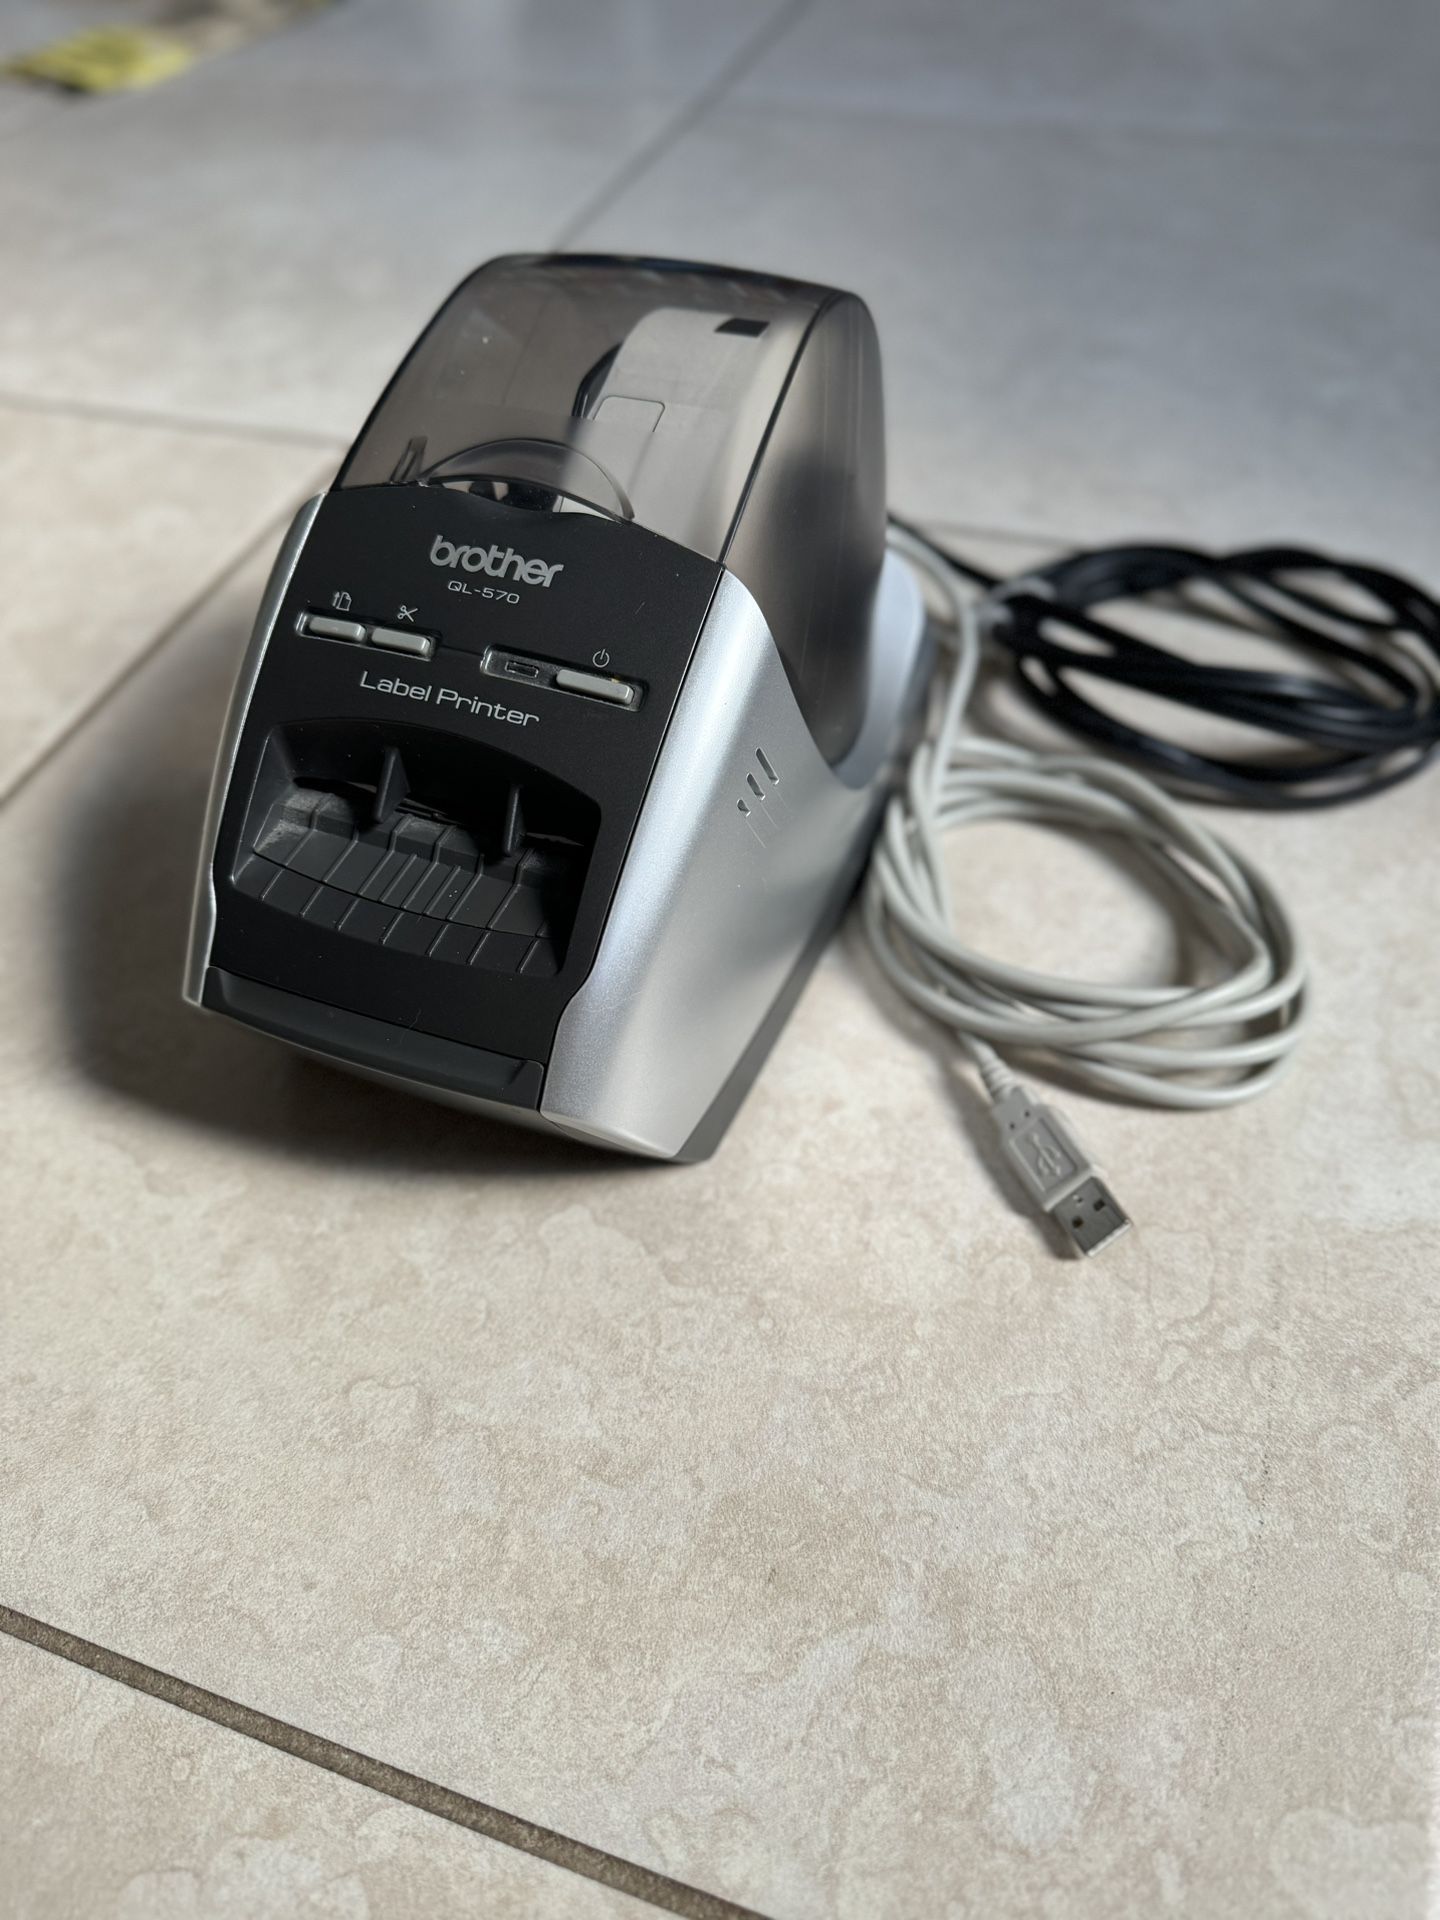 Brother QL-570 Professional Label Printer With Power Cord And USB Cord